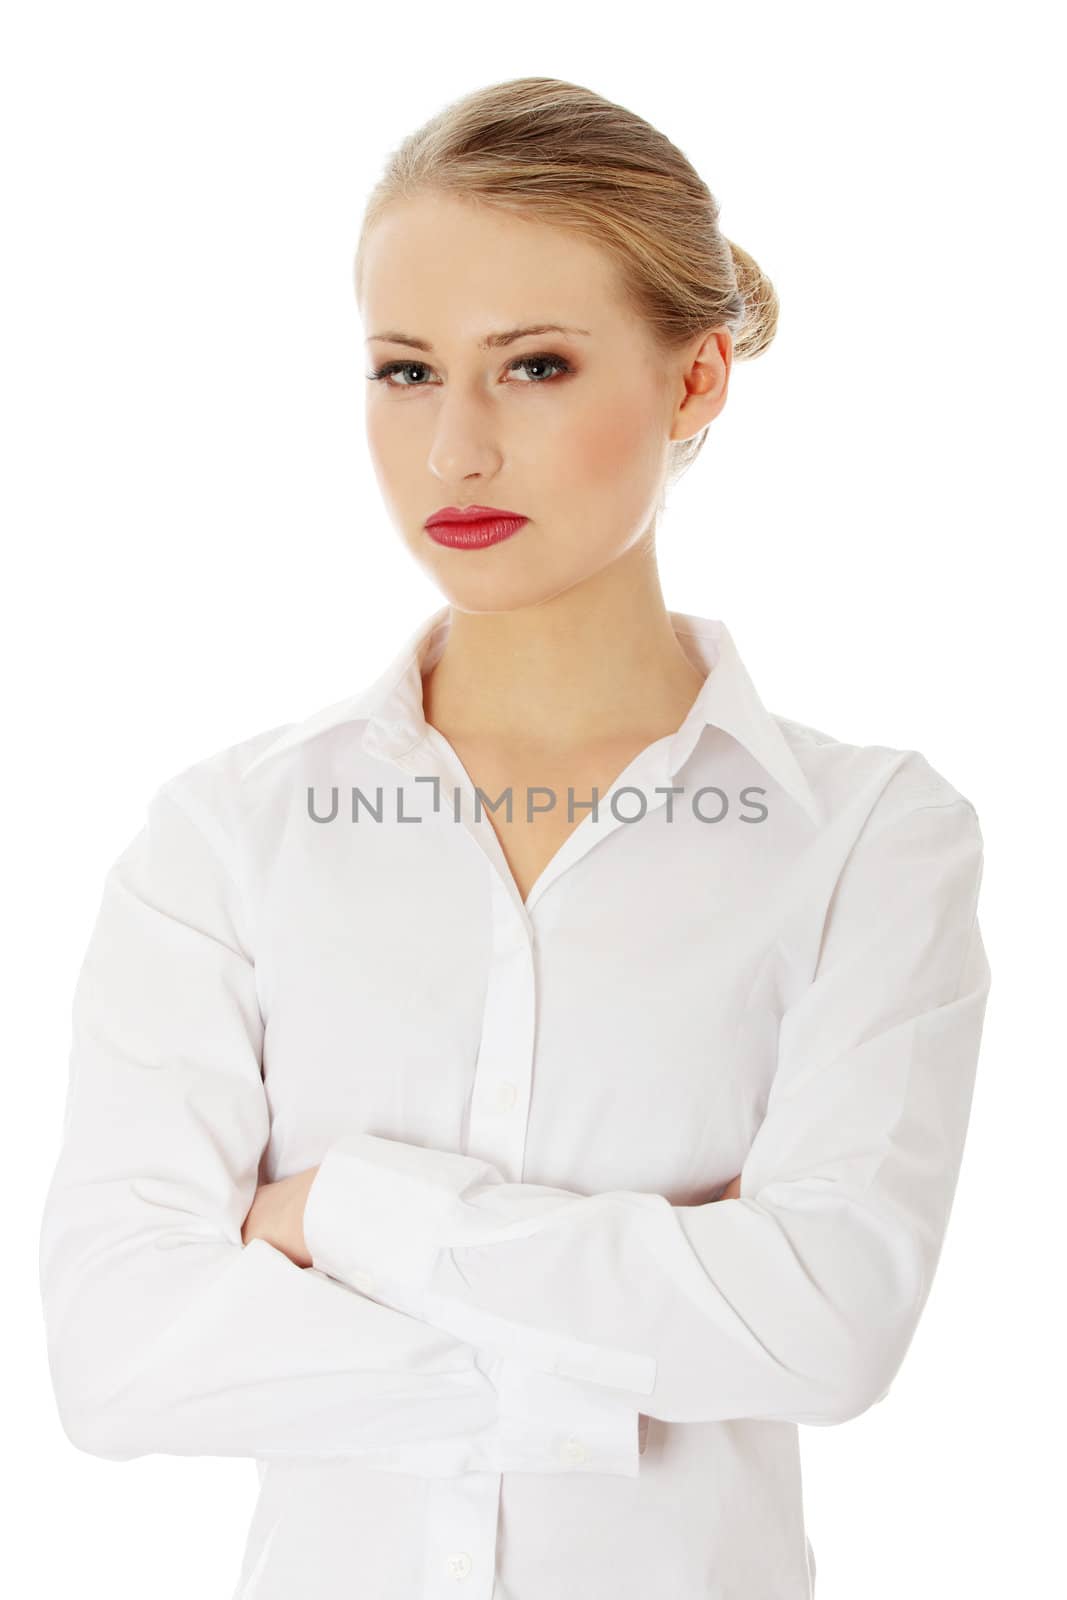 Young happy businesswoman, isolated on white